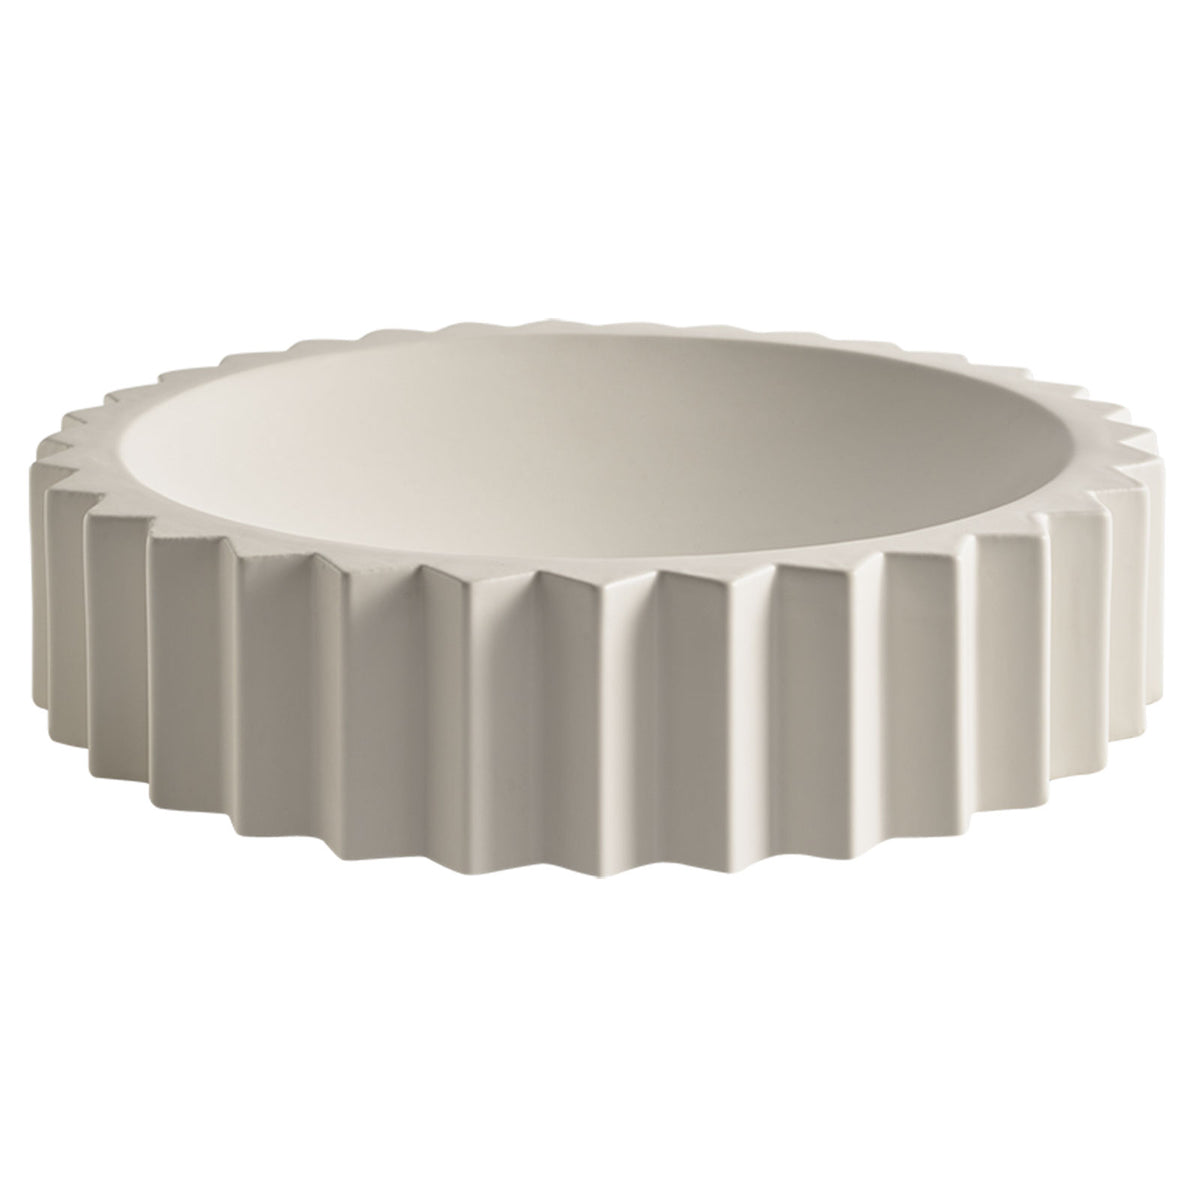 Parallel Lines Bowl, White